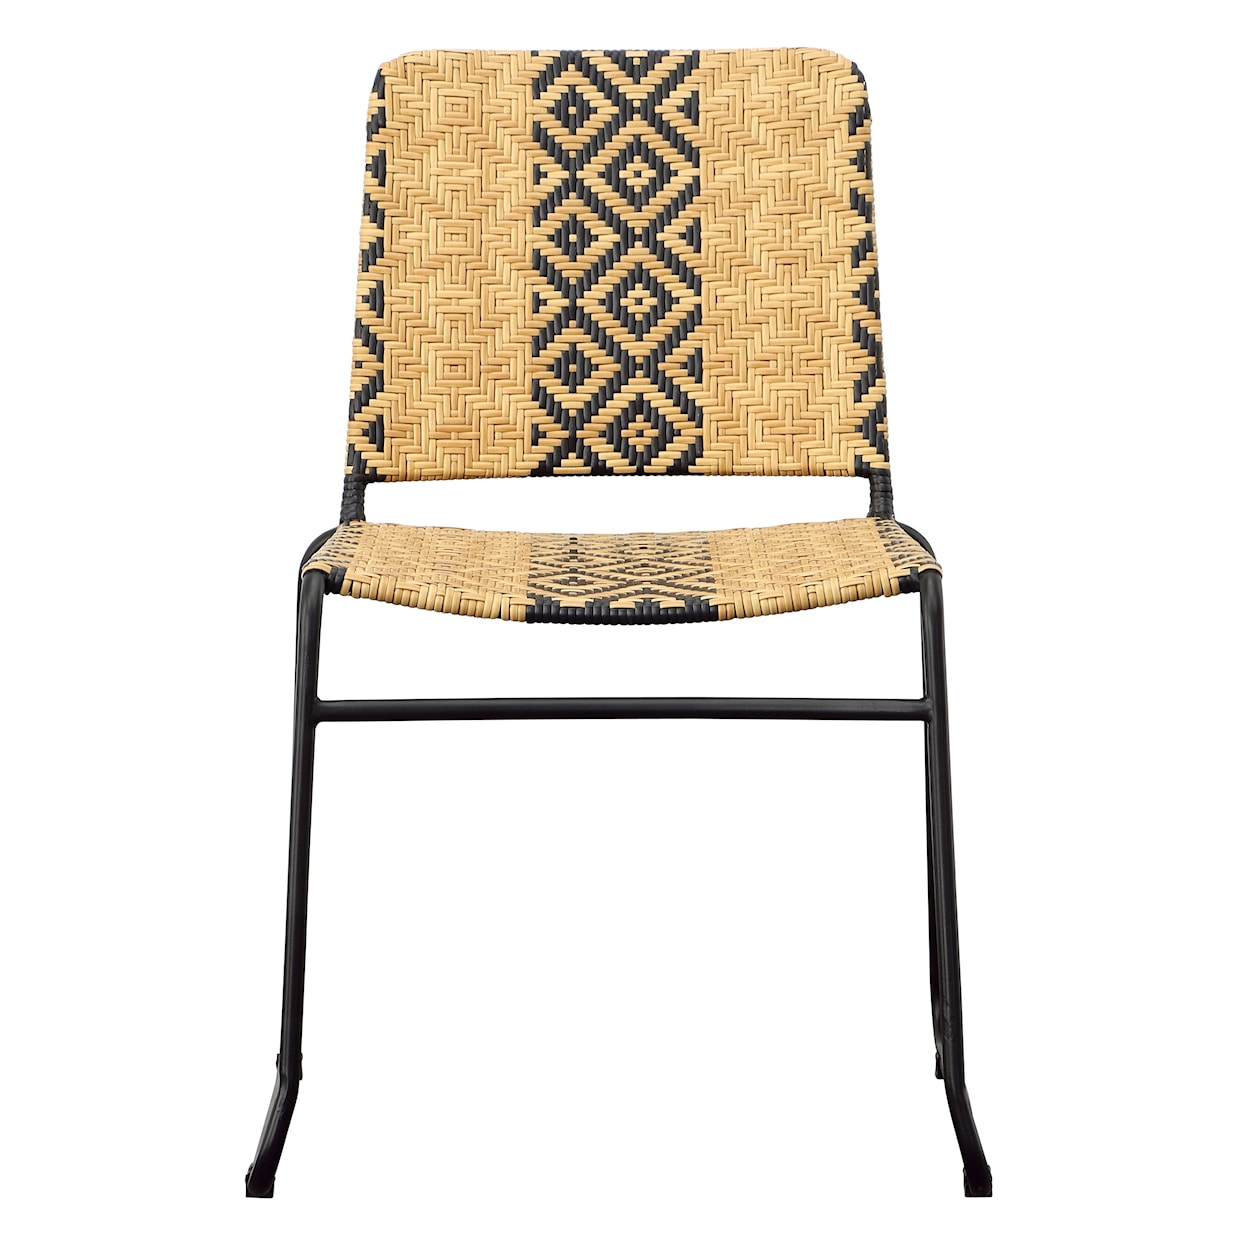 Dovetail Furniture Kamila Outdoor Dining Chair 